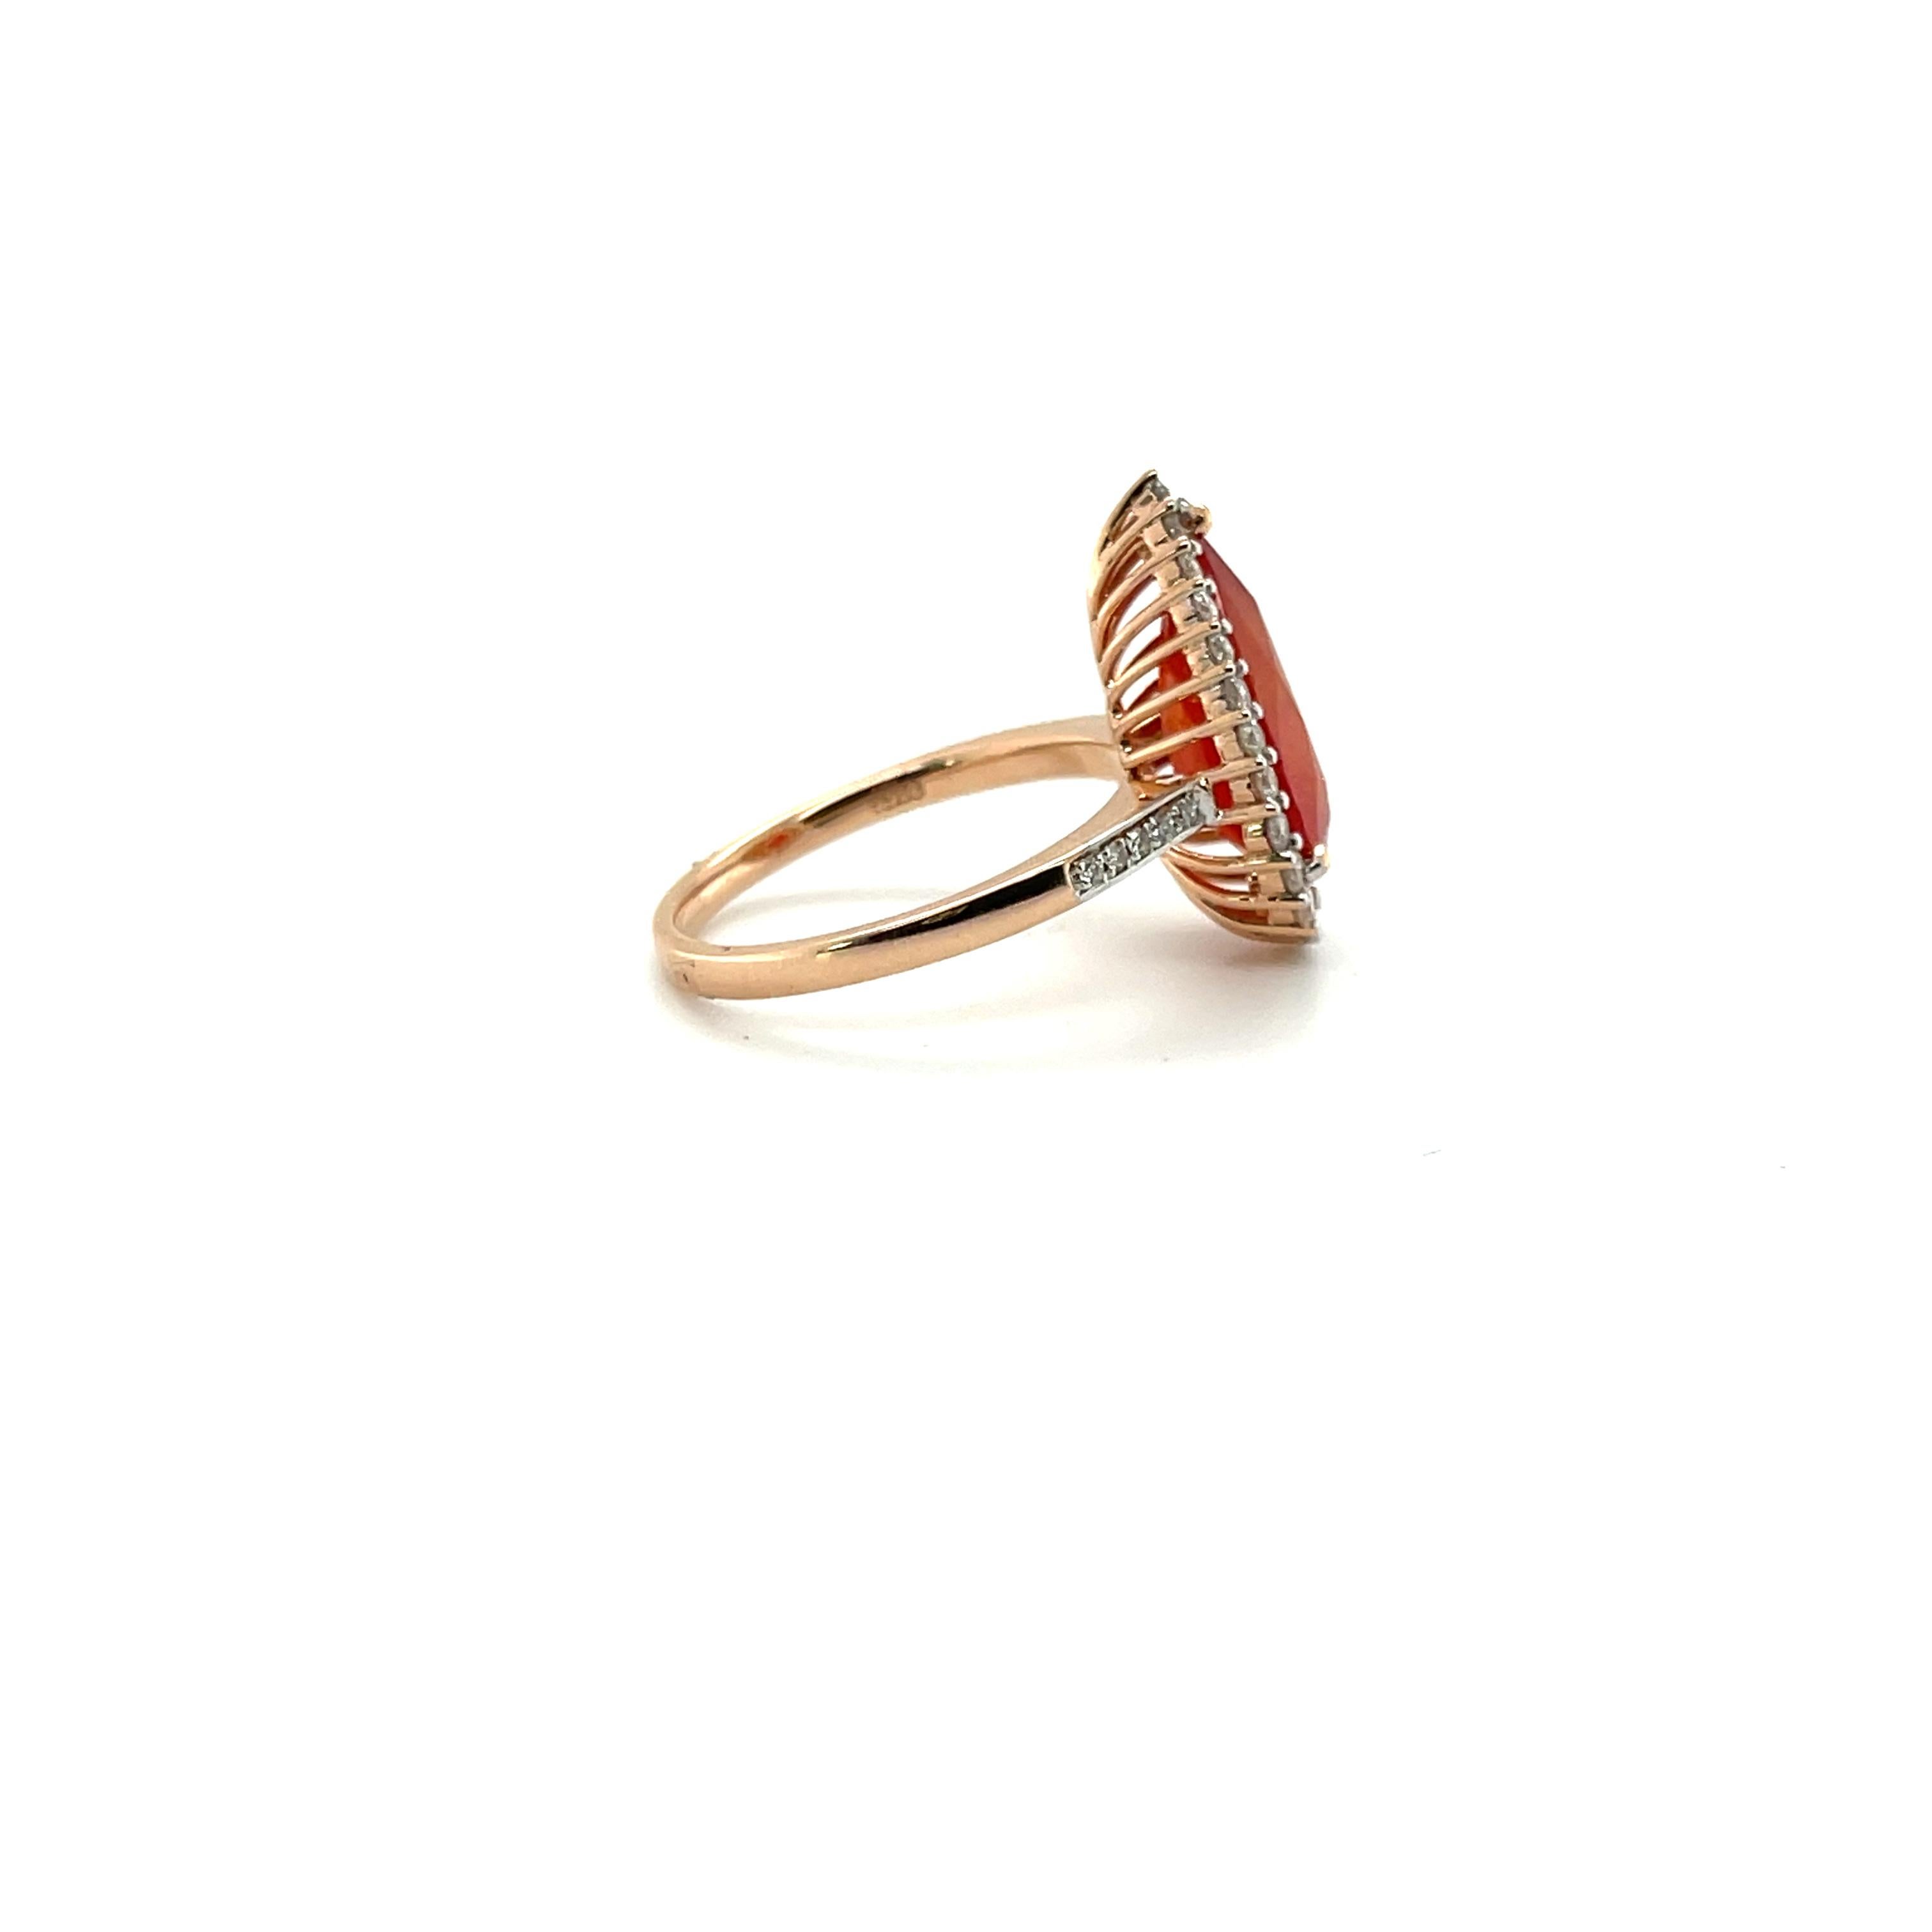 Pear Ruby and Diamonds , gorgeously crafted in fourteen karat rose gold, complimented by a stunning polished finish design.

Purpose of appraisal: Retail replacement value for insurance purposes
Item: One stamped 14CT rose gold Ruby and diamond